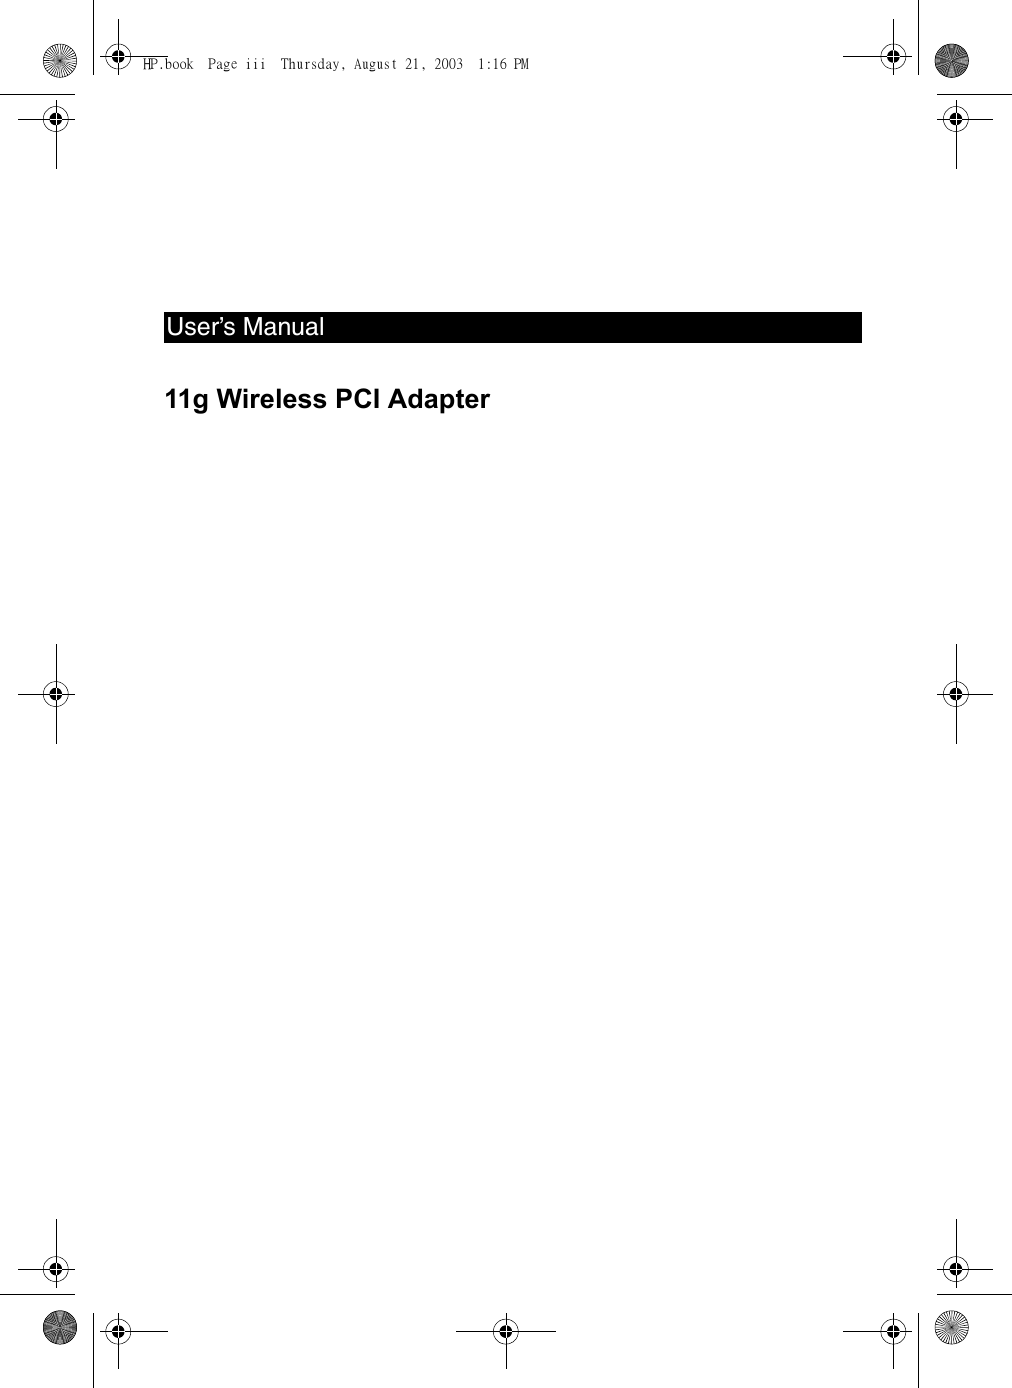 User’s Manual11g Wireless PCI AdapterHP.book  Page iii  Thursday, August 21, 2003  1:16 PM